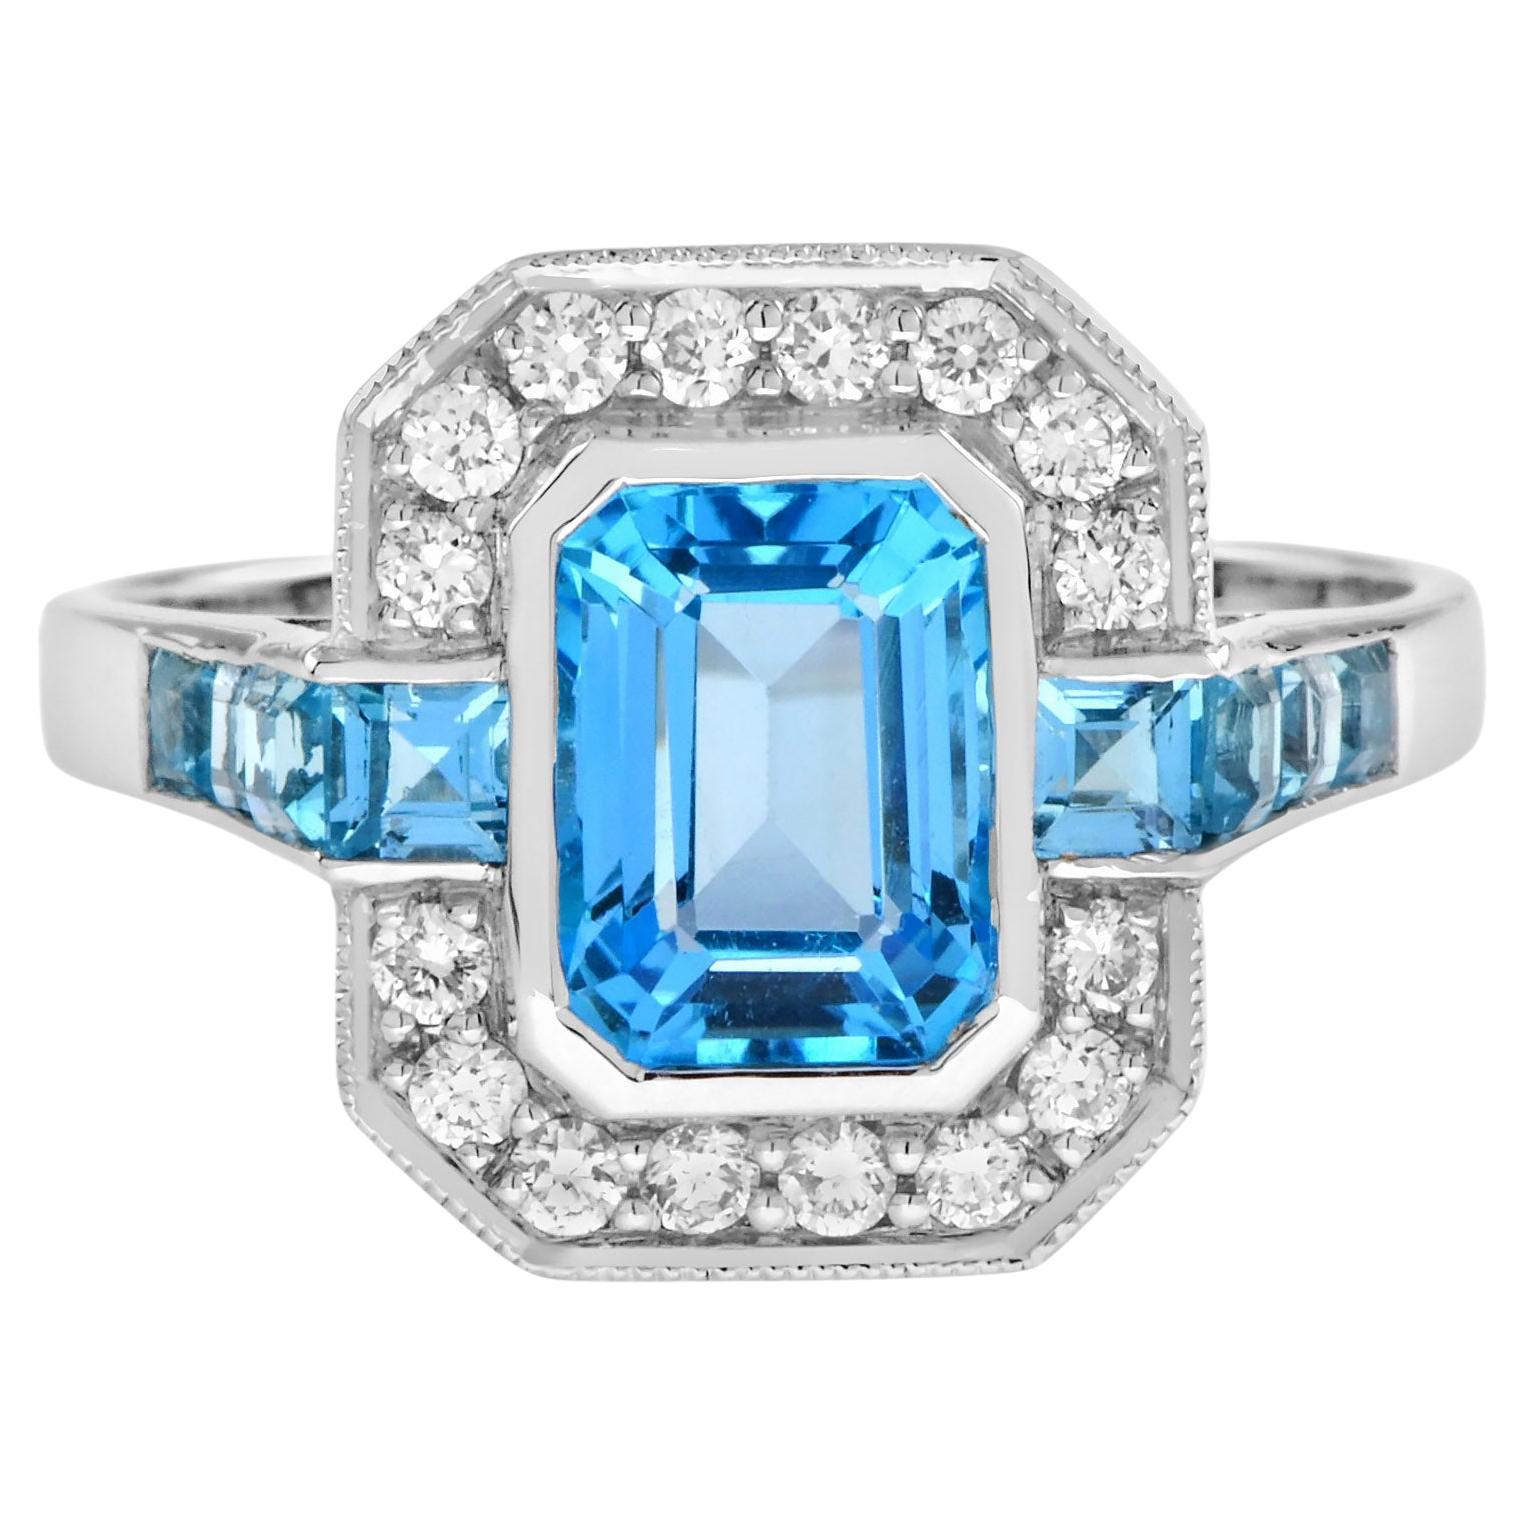 Swiss Blue Topaz and Diamond Art Deco Style Engagement Ring in 14K White Gold For Sale